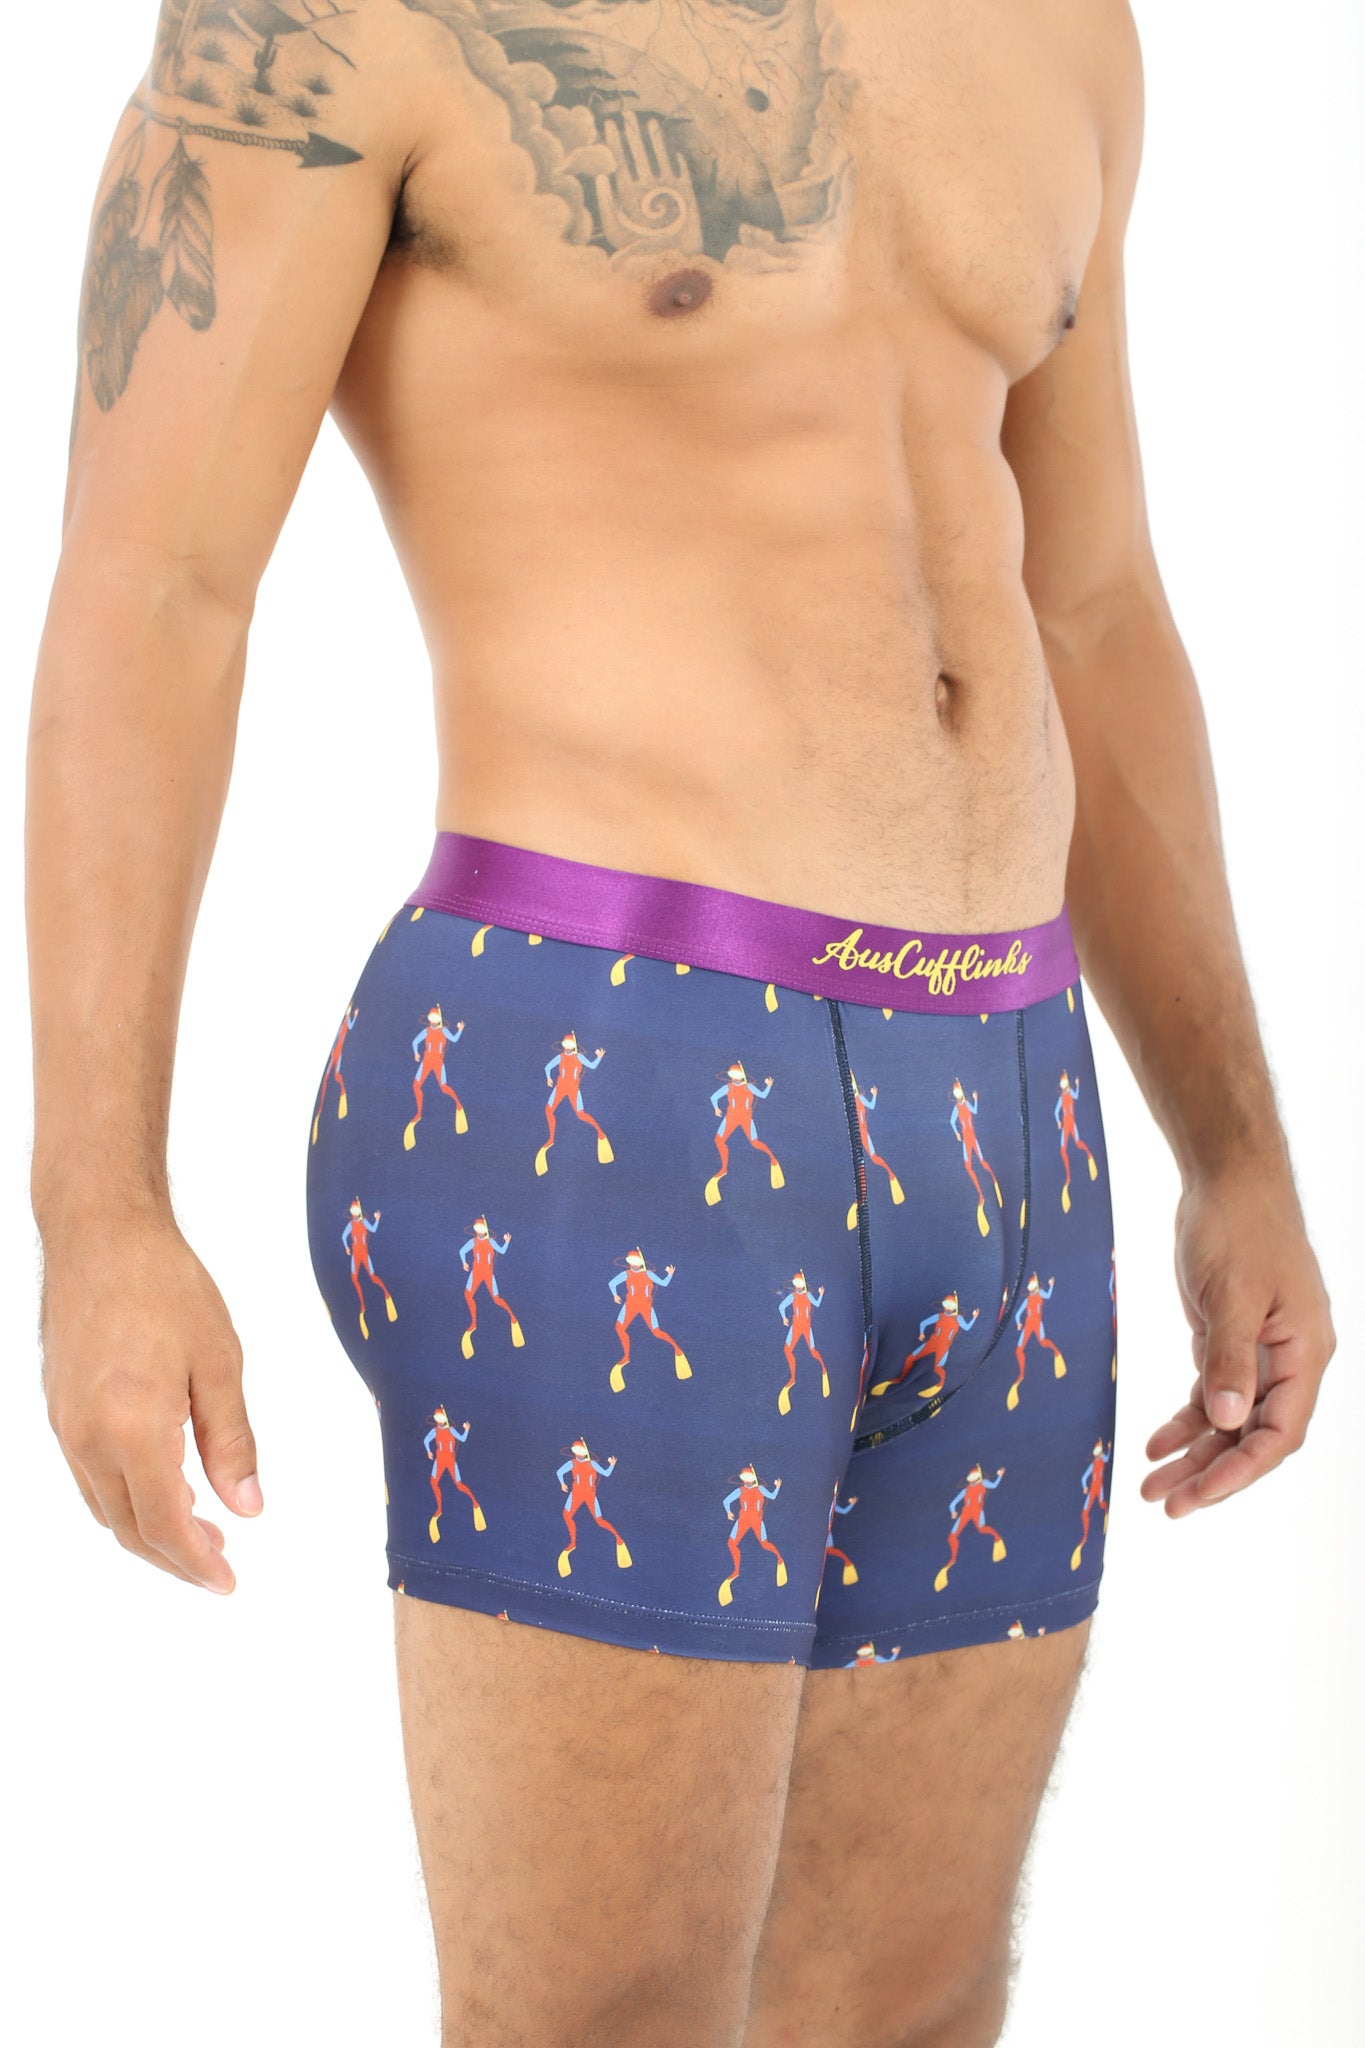 A man wearing Scuba Diver Underwear that provide both comfort and style.